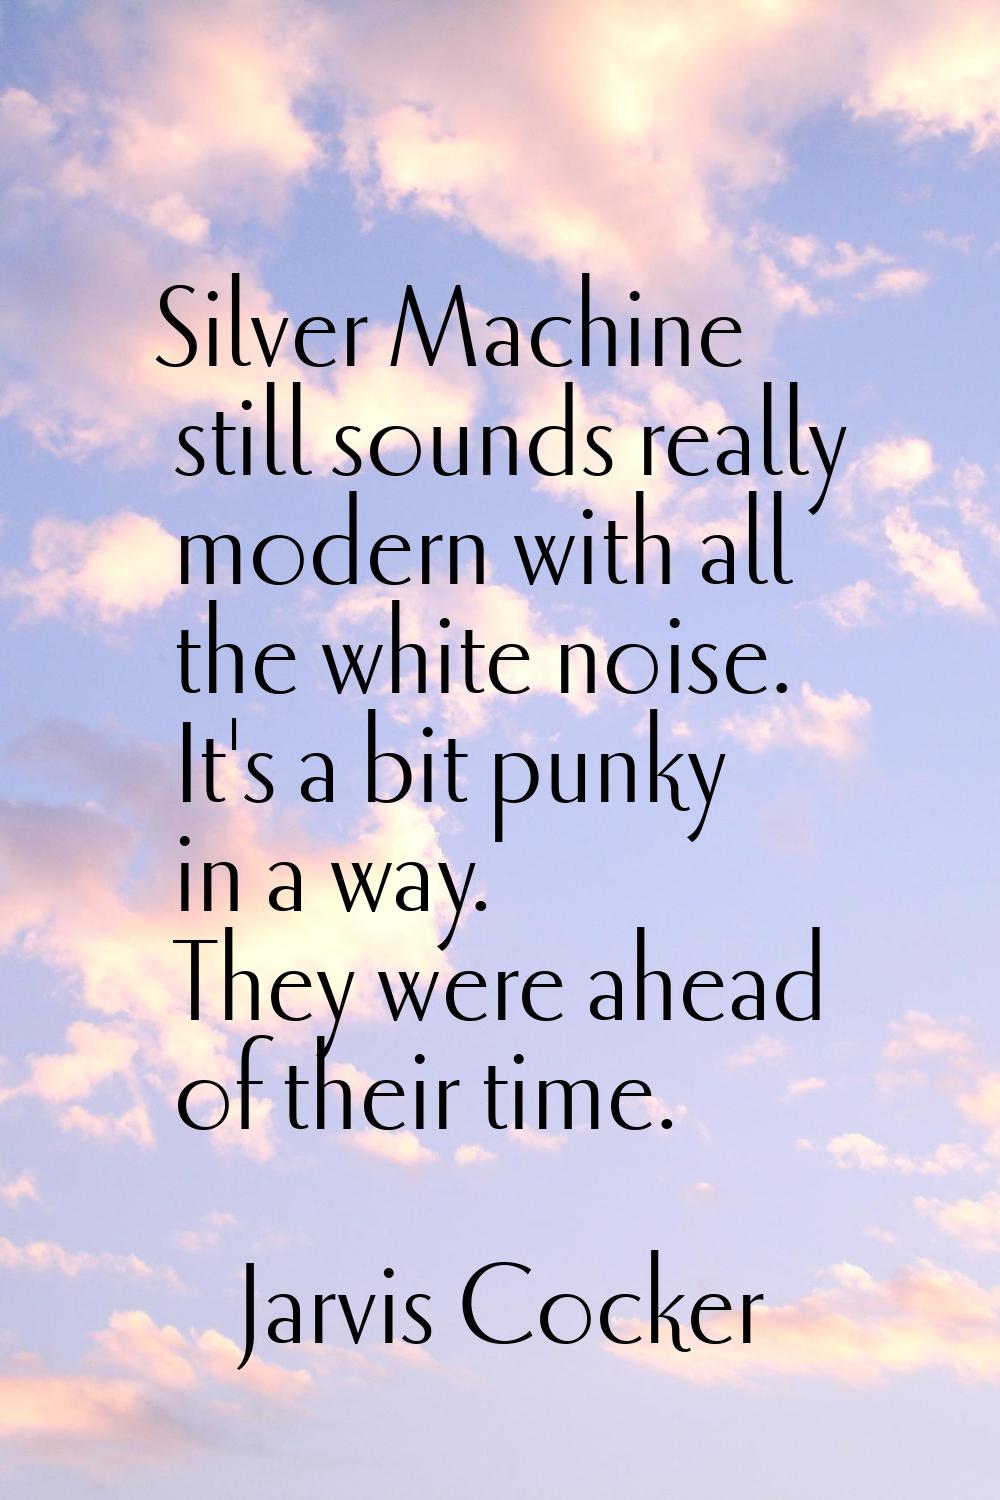 Silver Machine still sounds really modern with all the white noise. It's a bit punky in a way. They